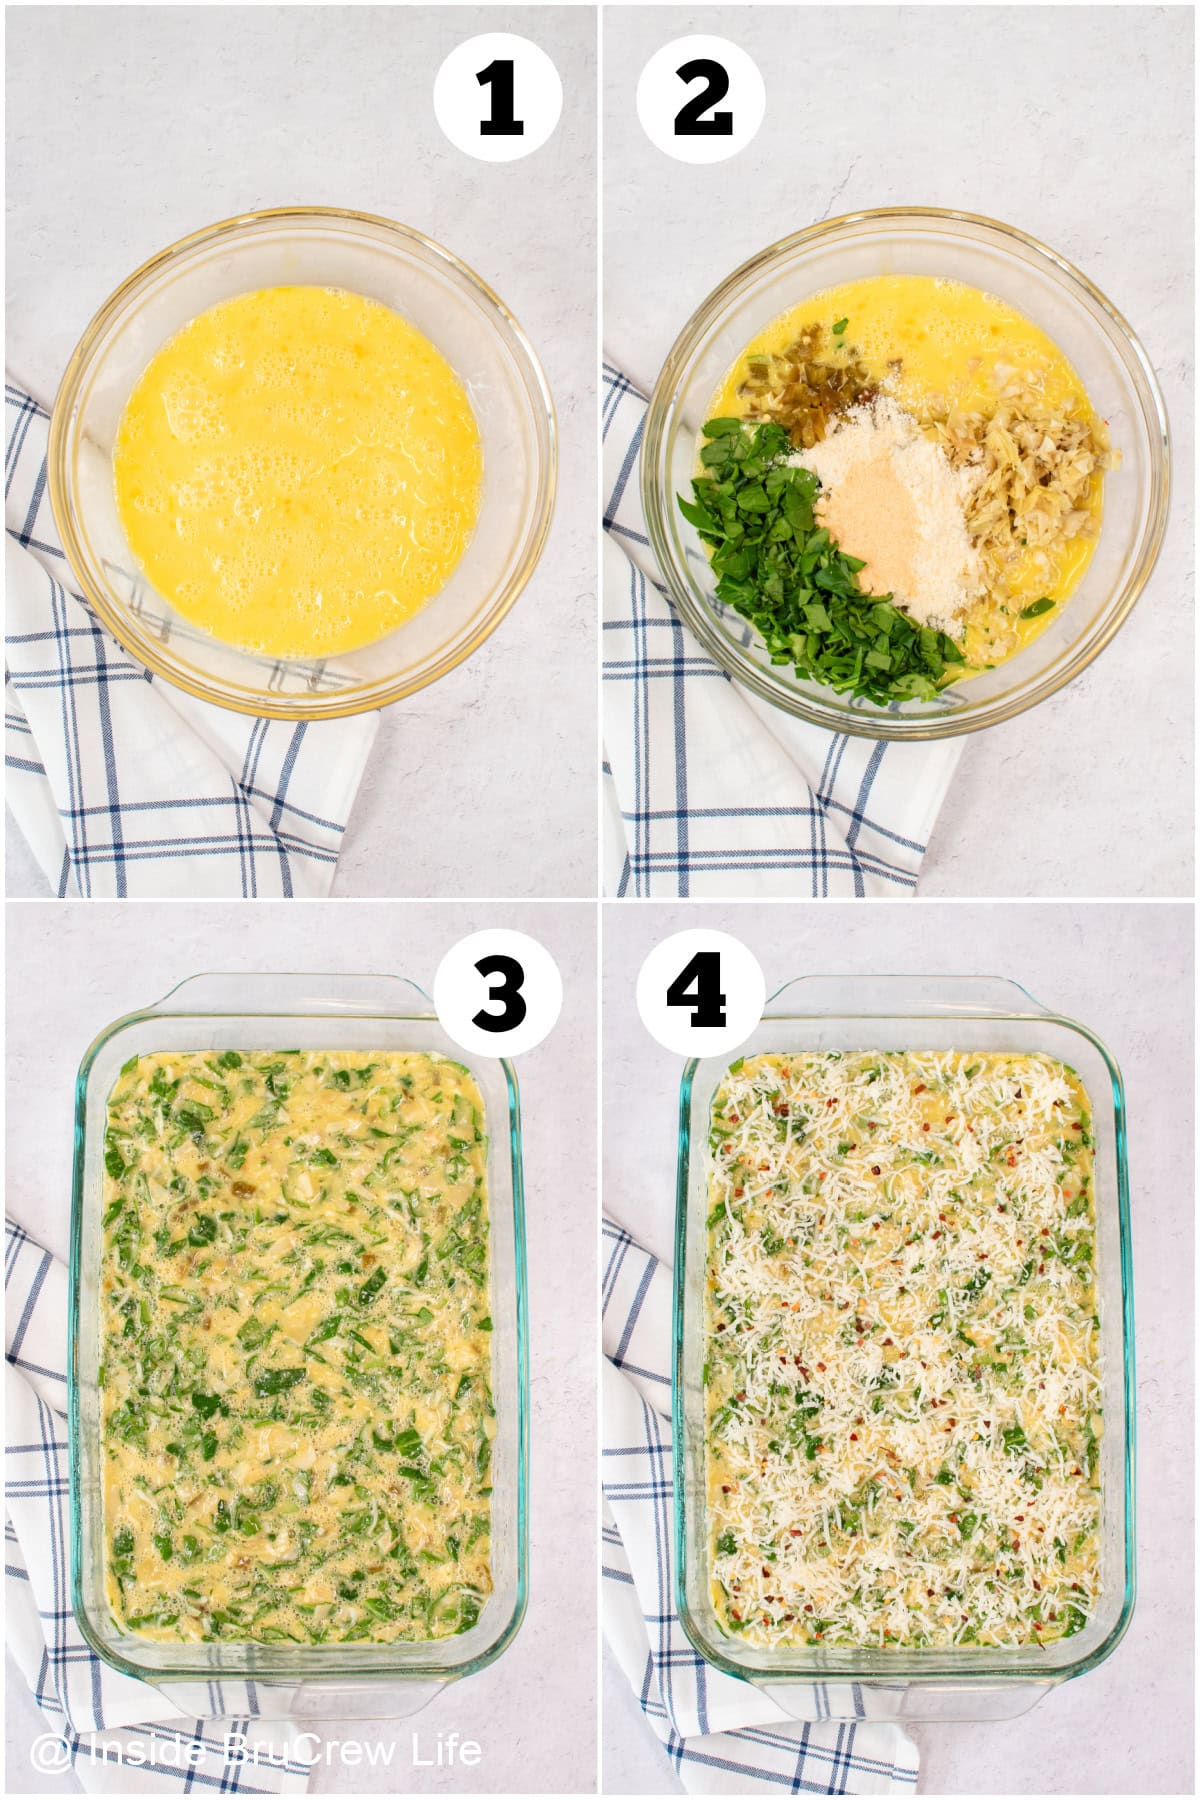 Four pictures collaged together showing how to make an egg bake.